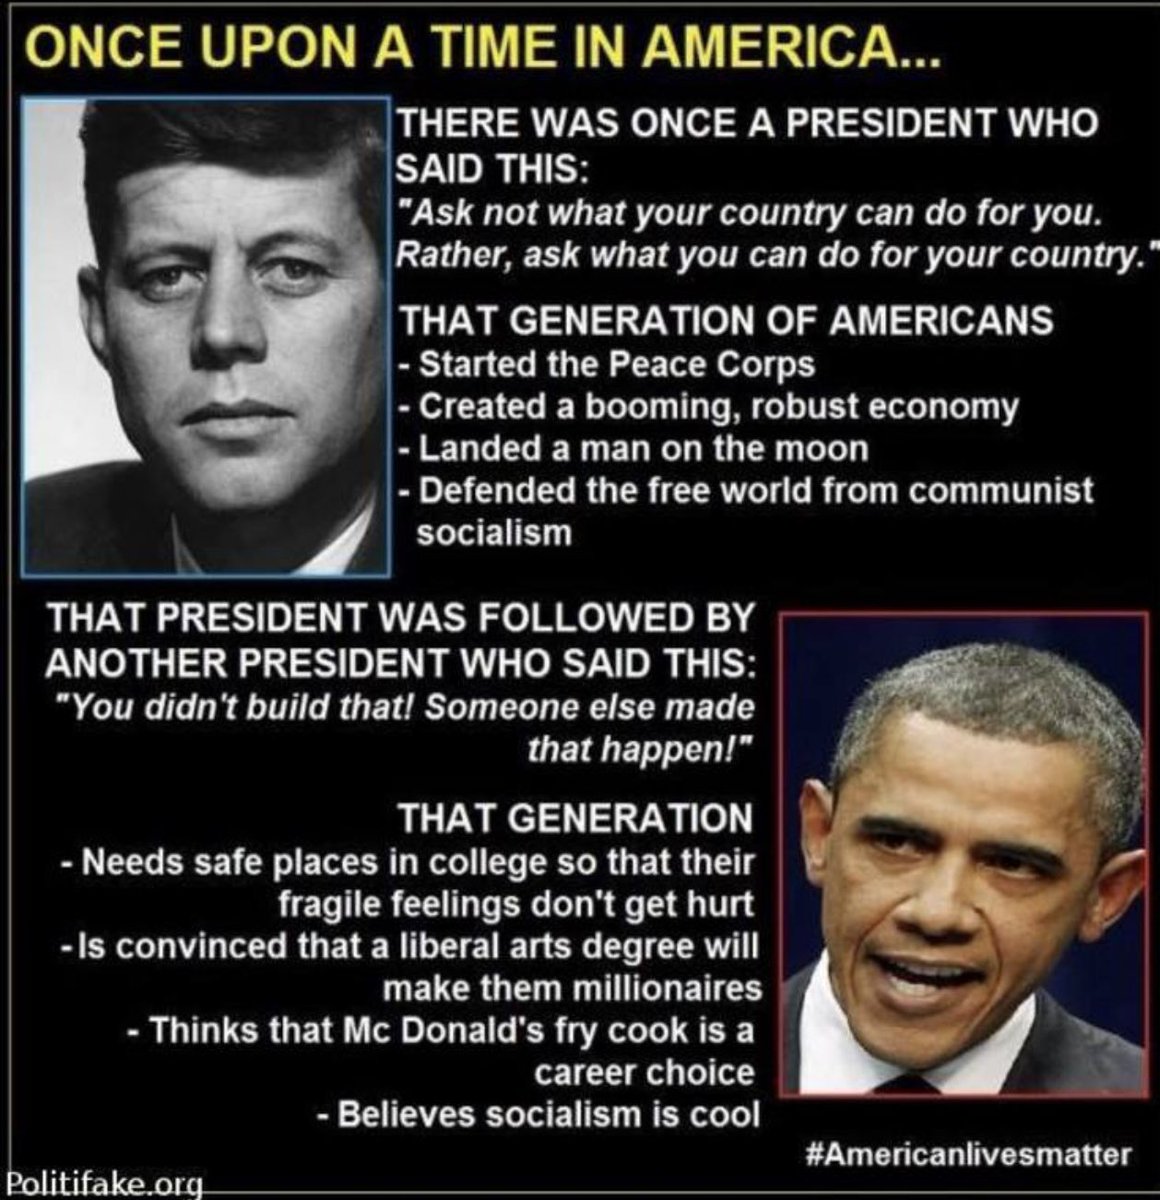 The contrast between these two Democratic Presidents is extreme. I don’t think John F Kennedy would have agreed with anything Barack Obama stands for! @bdonesem ⚔️🔷⚔️ @CoVet_81 🌹 @shftat6 @Bert7058 @Astud987 @pilldrswife @bud_cann @Hooyah85 @Saltlife177 @CaliRN619 @Ames2420